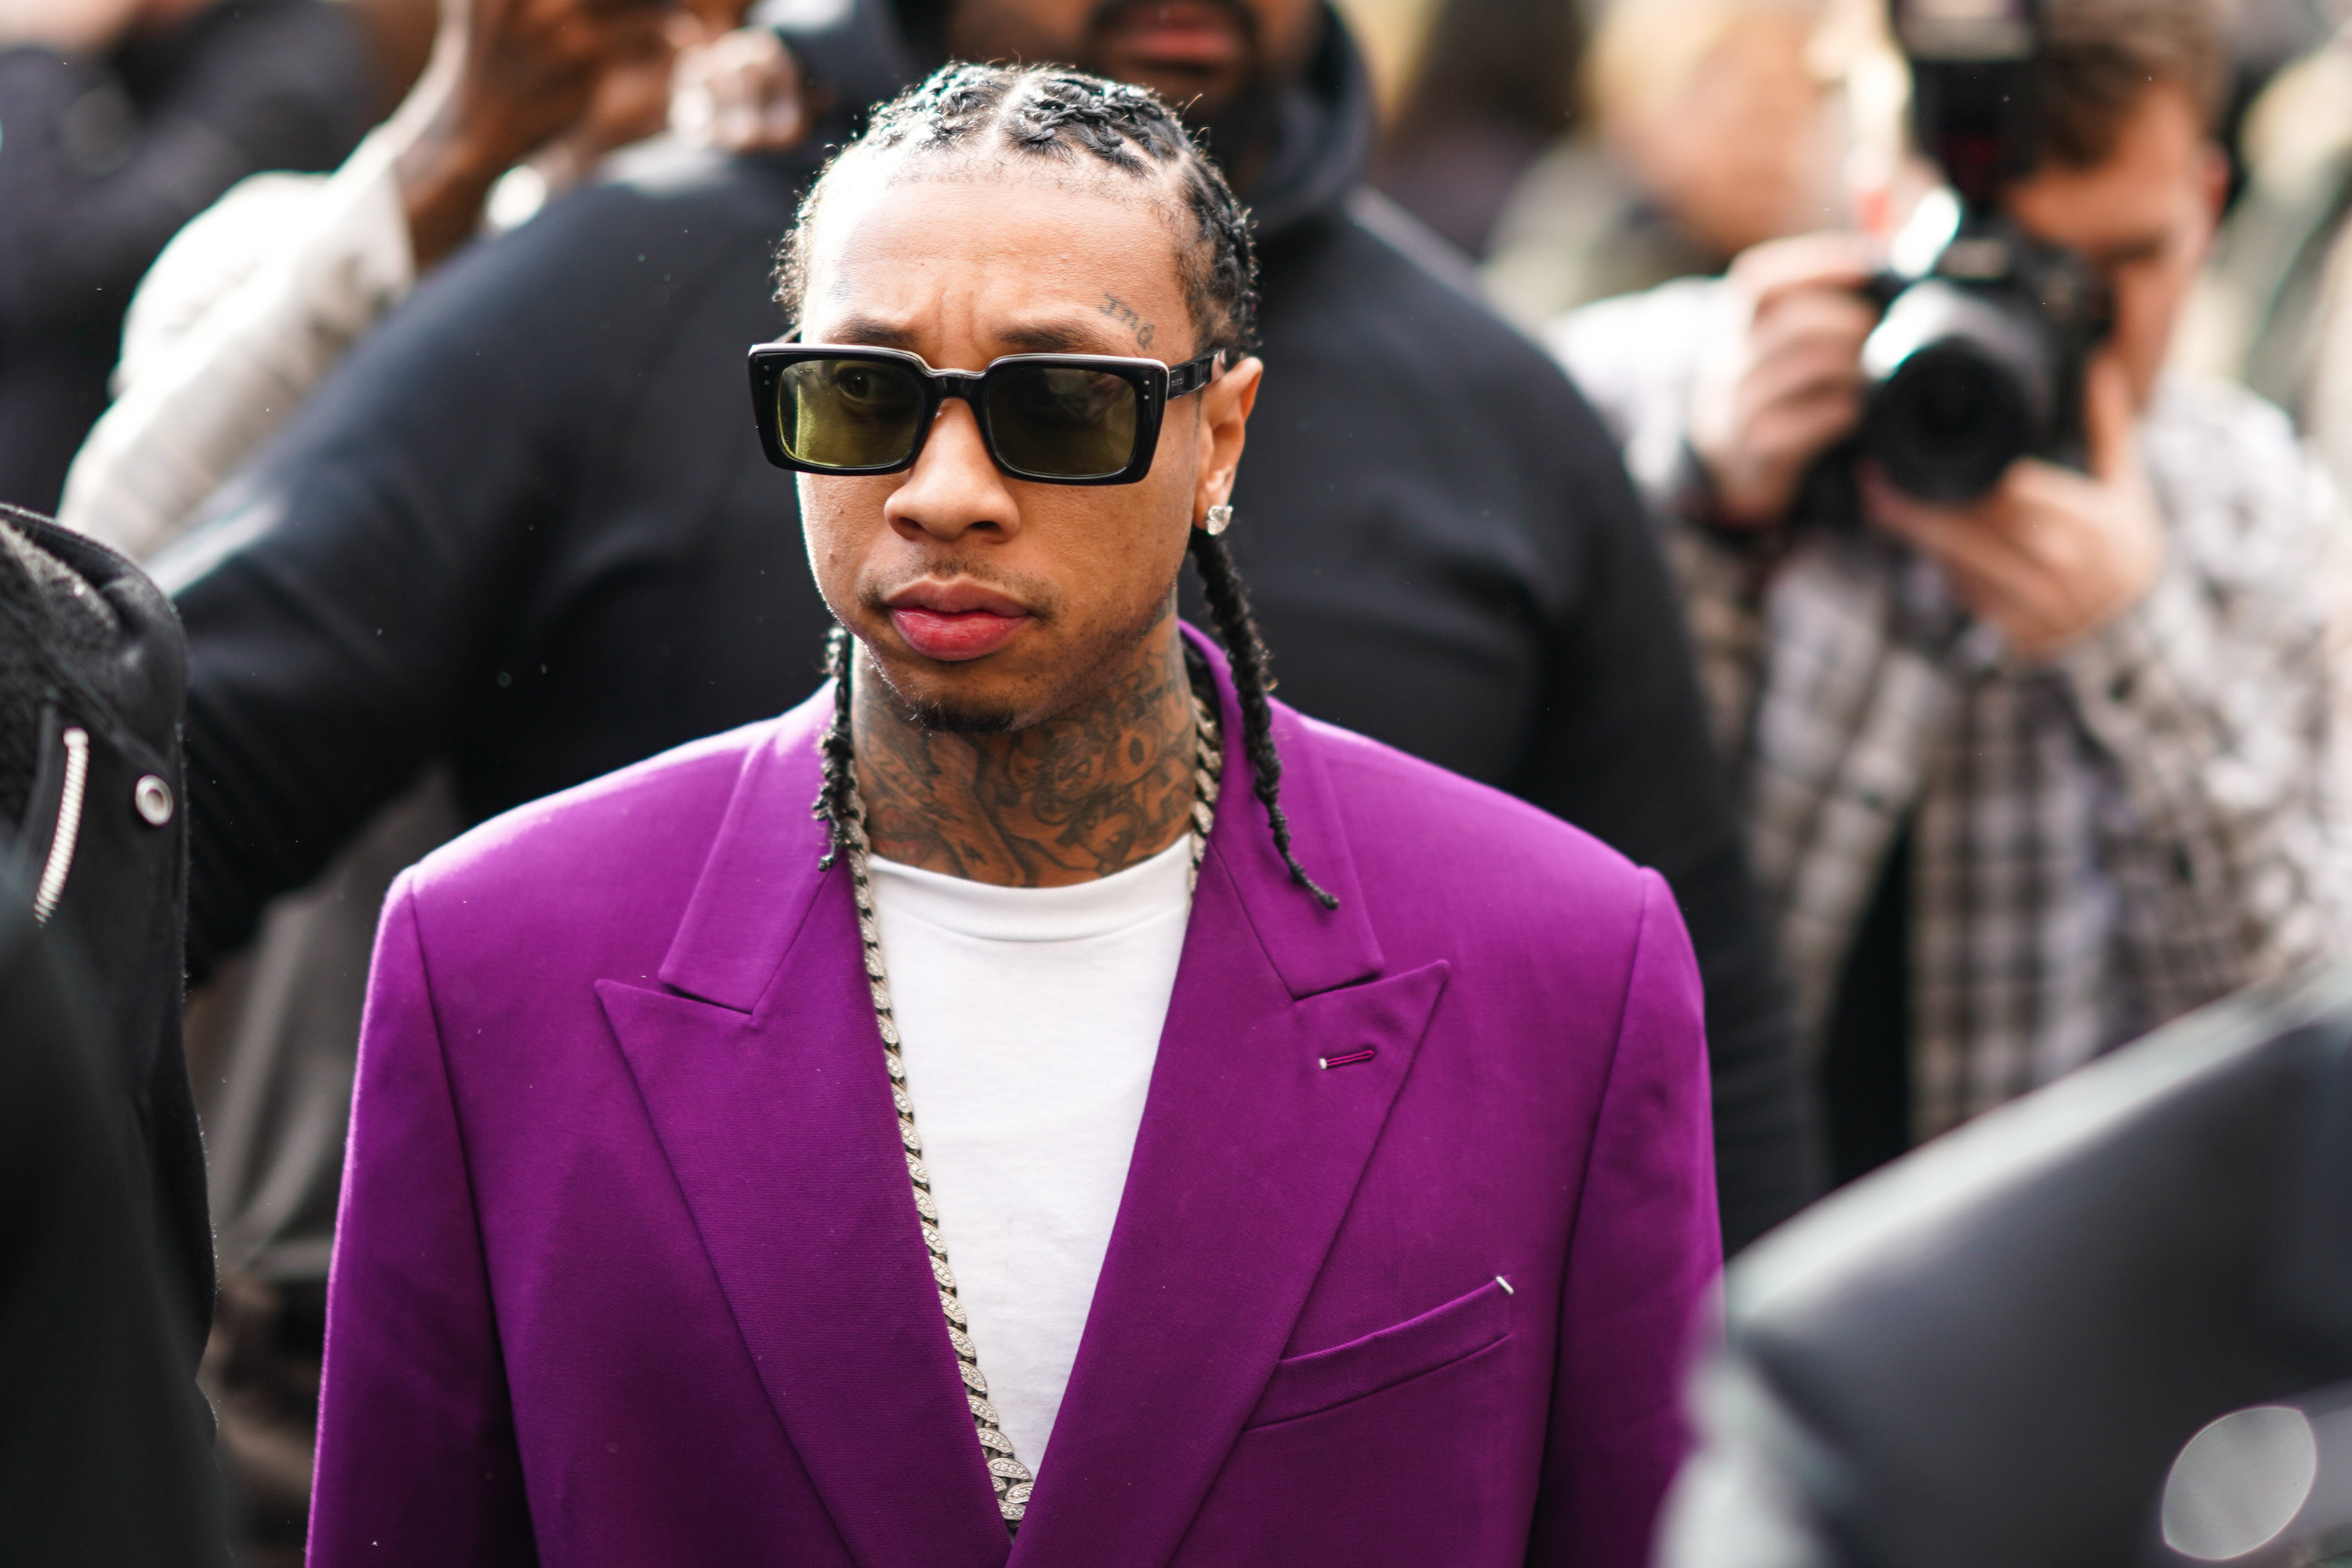 Tyga looks serious while standing in a crowd of photographers